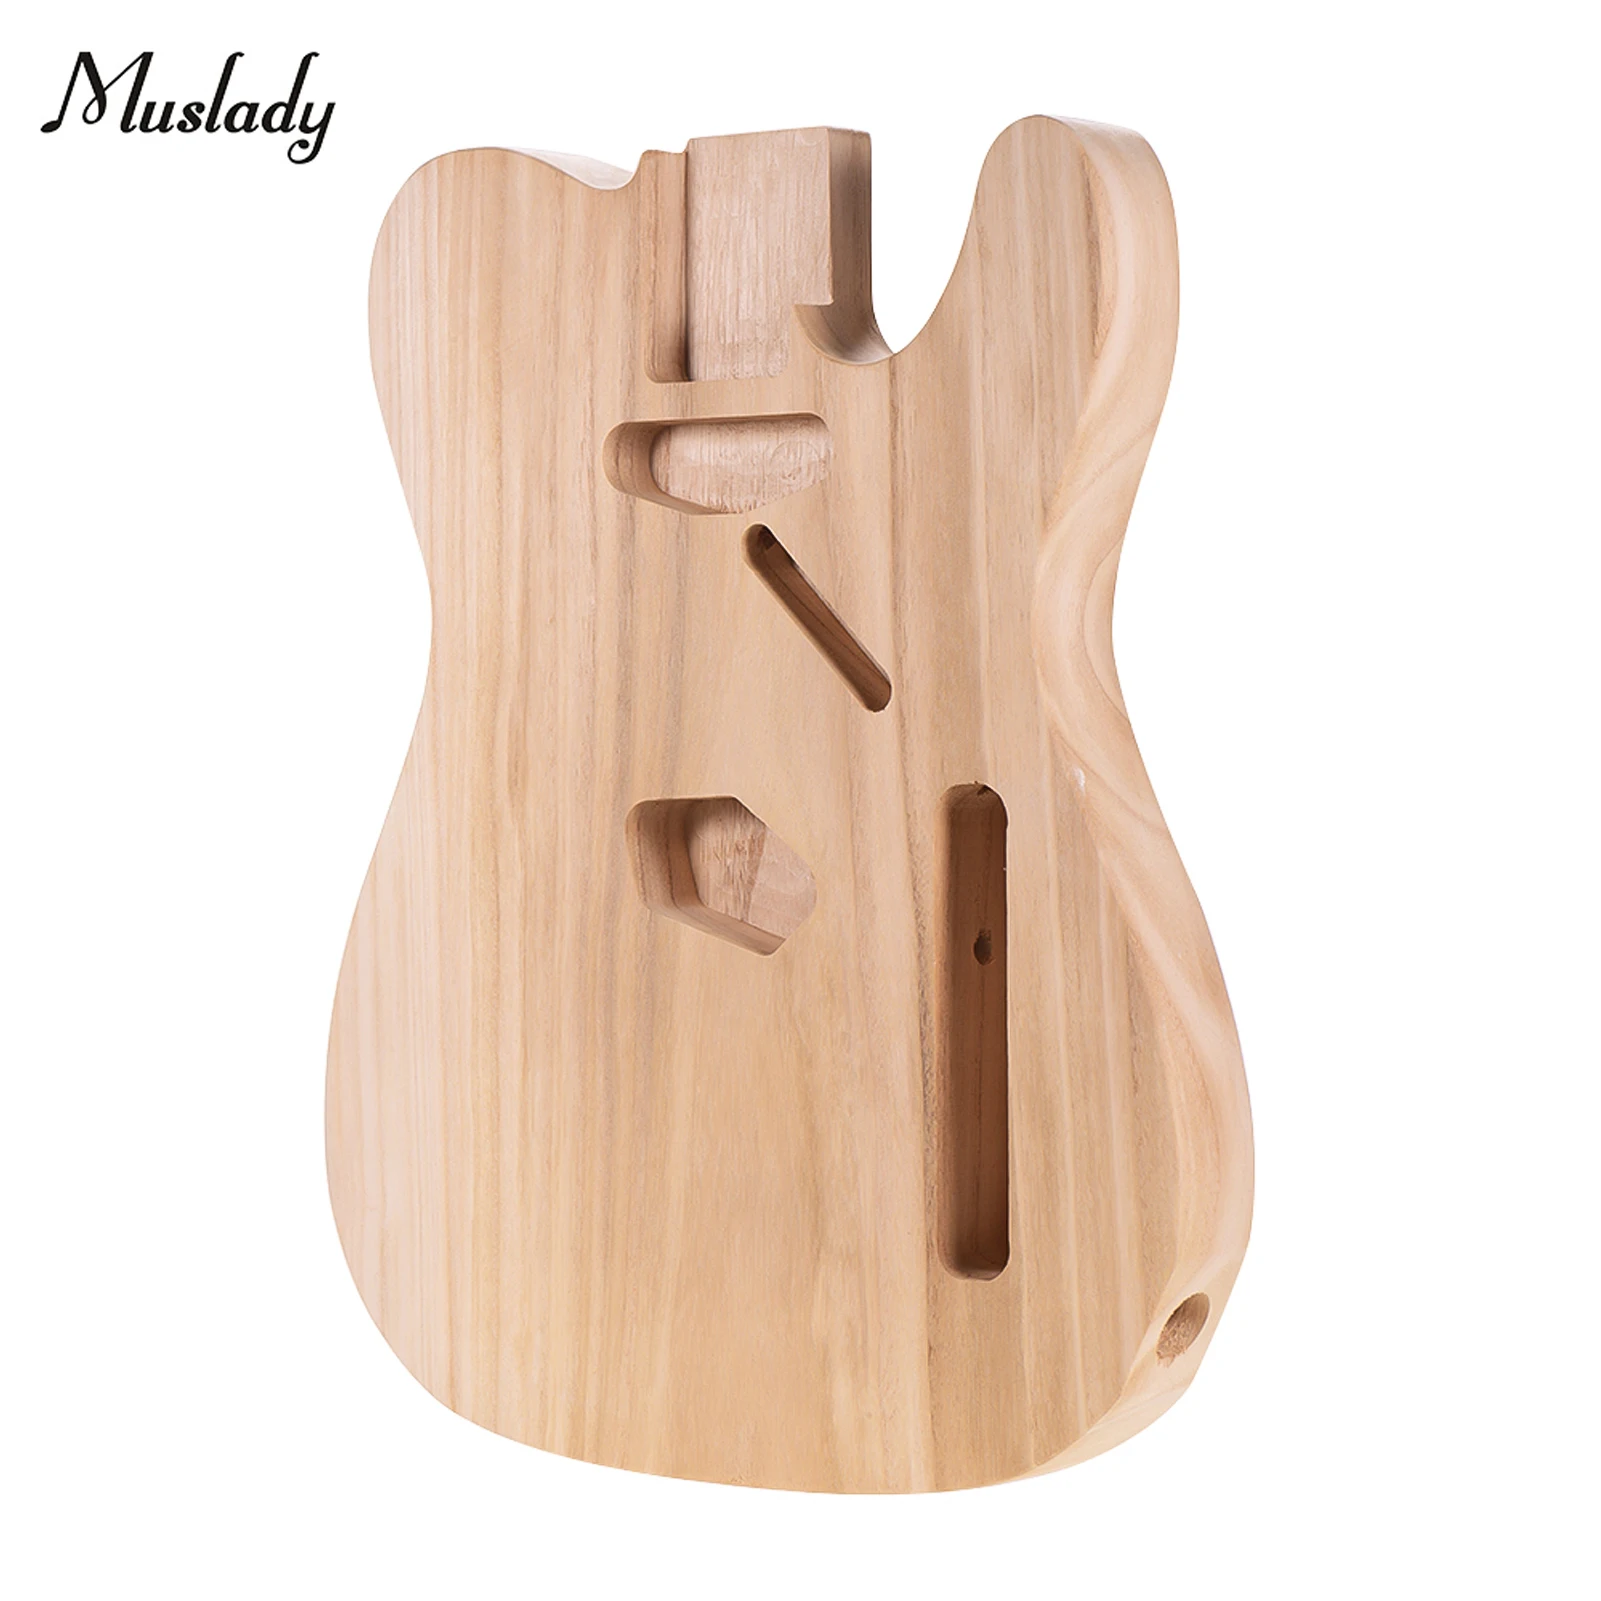 Muslady TL-T02 Unfinished Electric Guitar Body Sycamore Wood Blank Guitar Barrel for TELE Style Electric Guitars DIY Parts